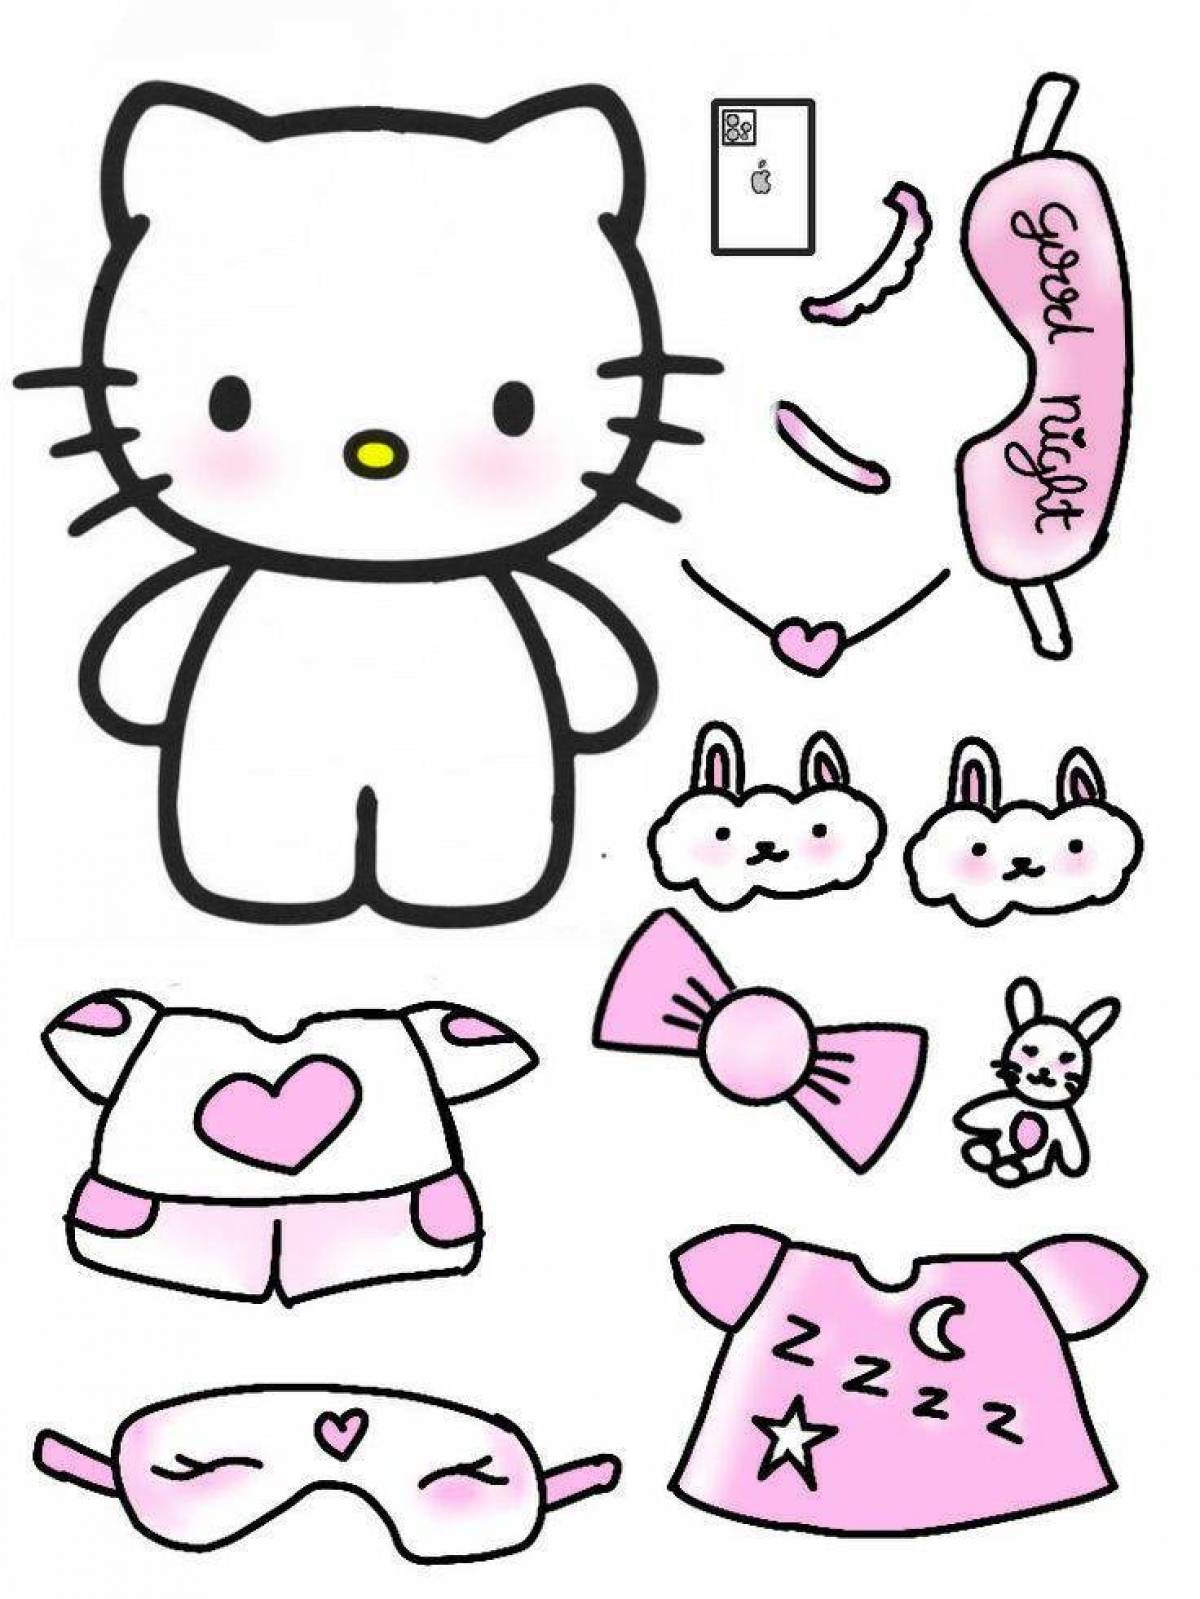 Charming hello kitty in clothes